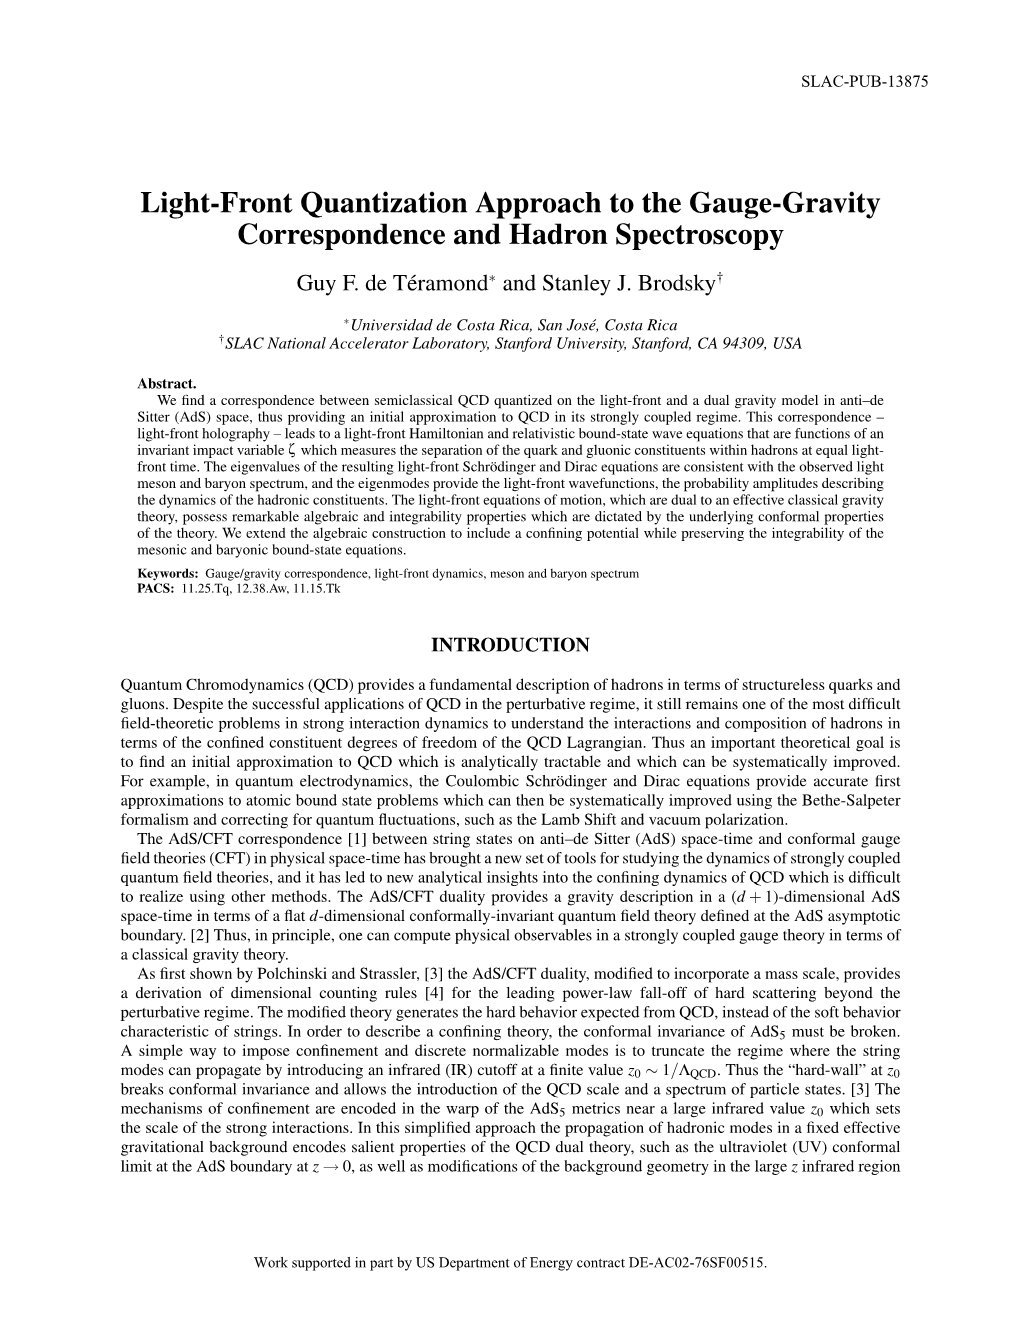 Light-Front Quantization Approach to the Gauge-Gravity Correspondence and Hadron Spectroscopy Guy F